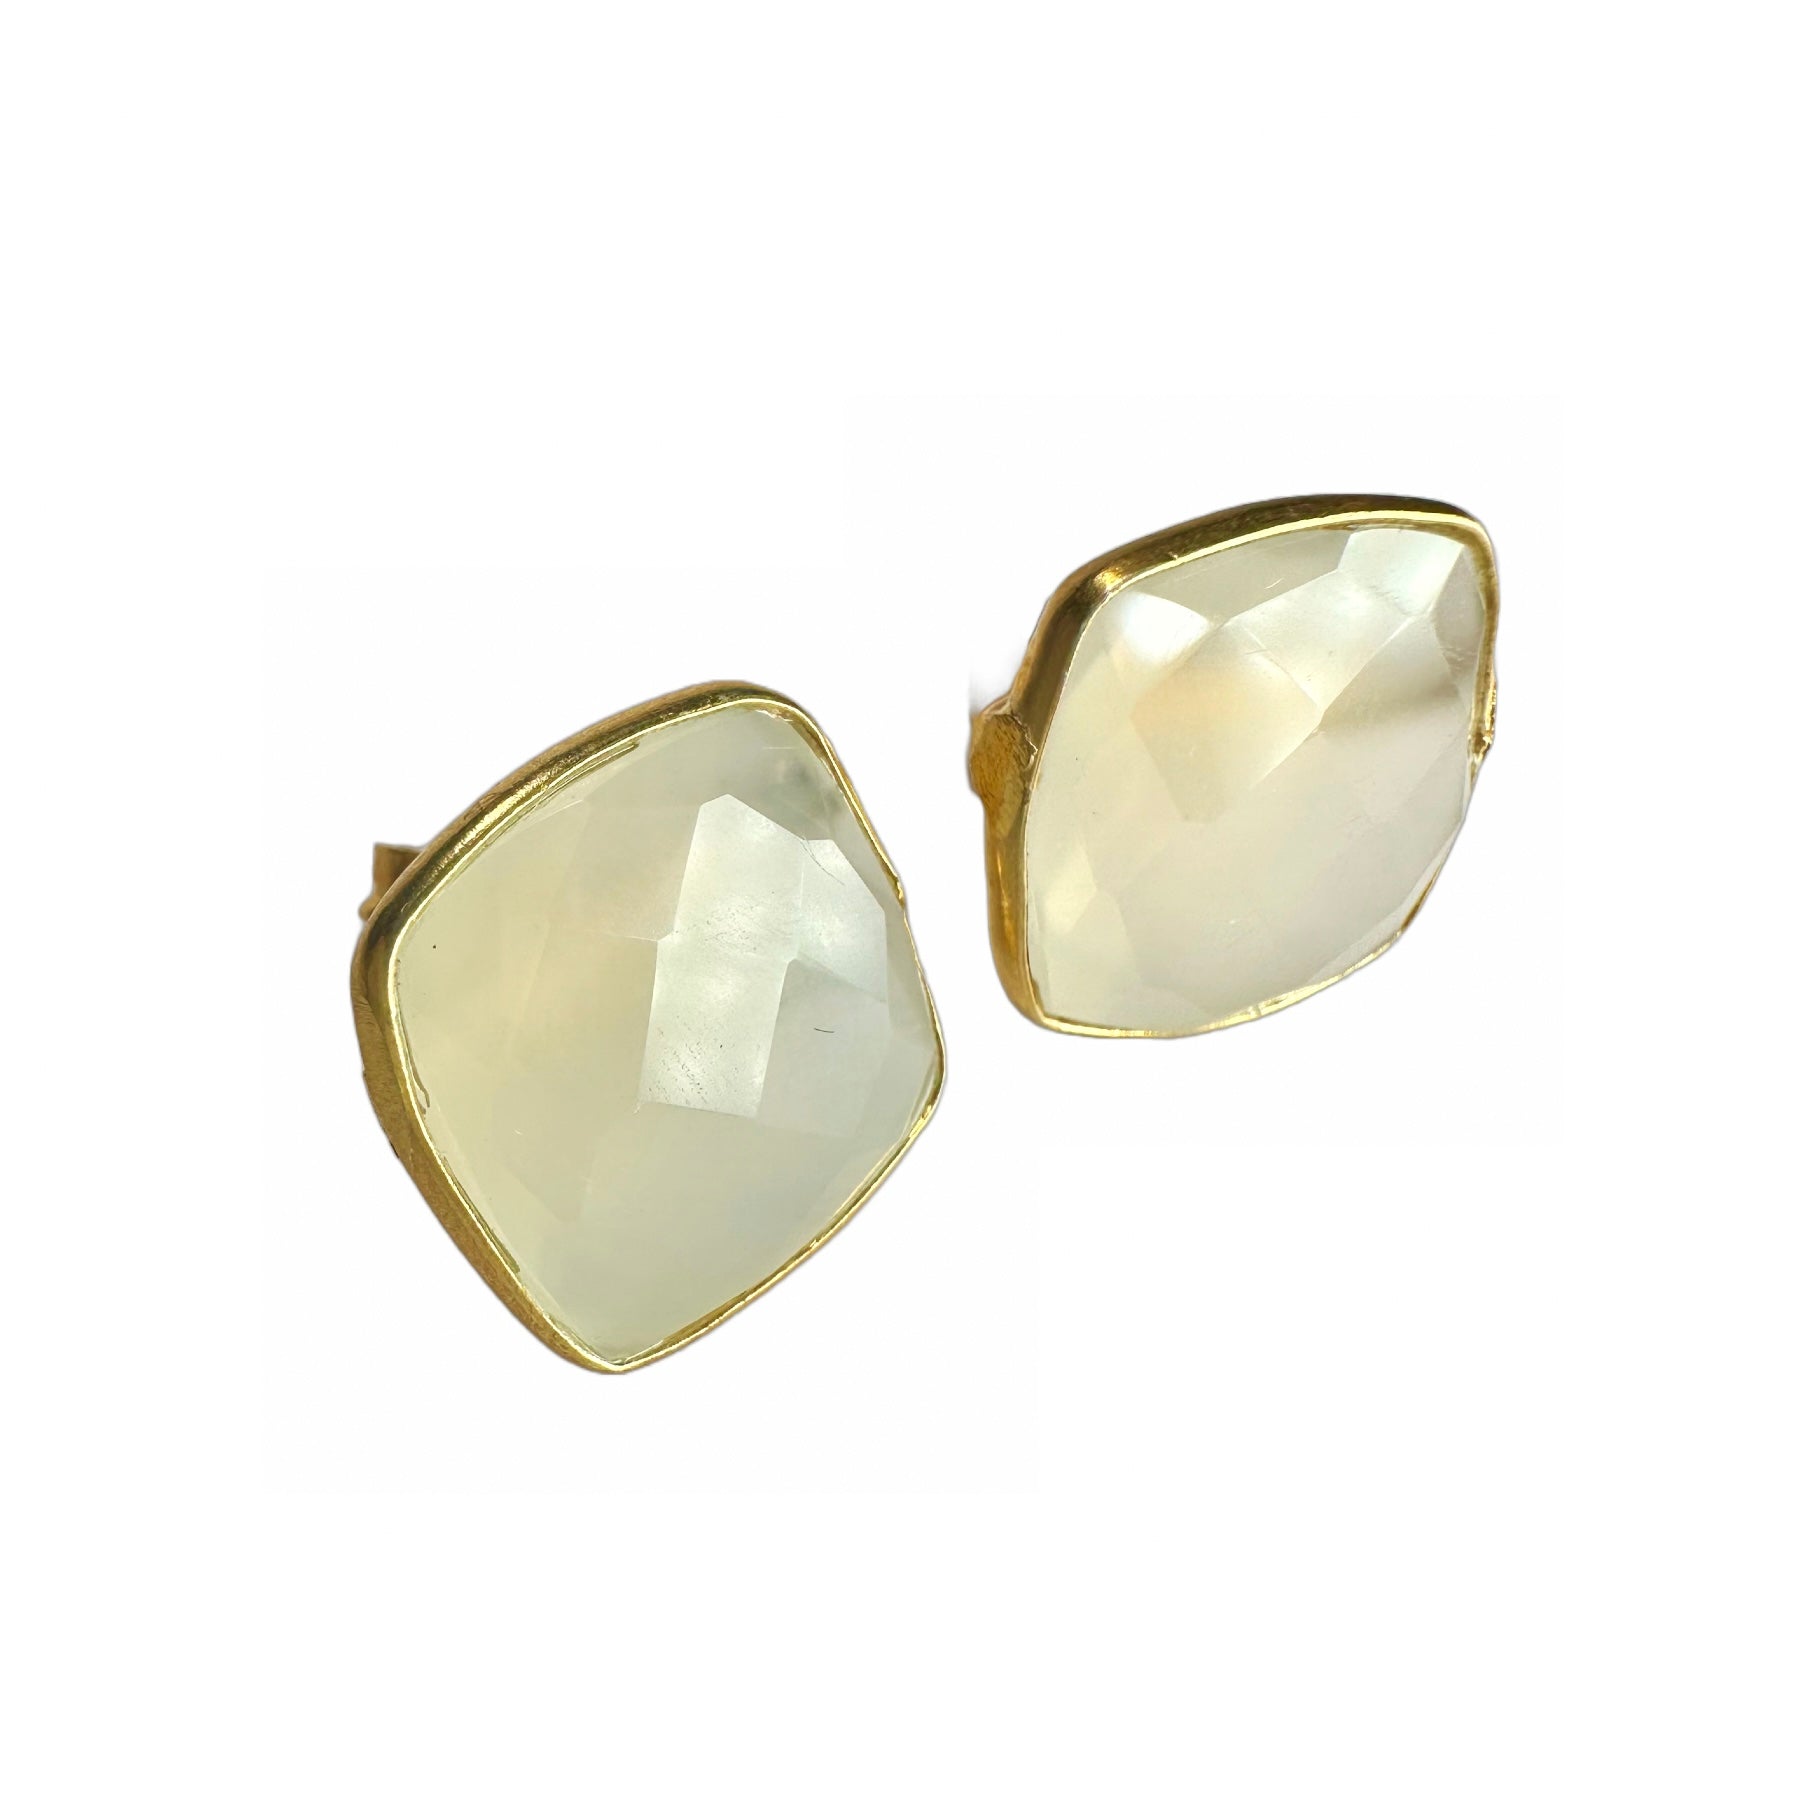 Gold-dipped White Onyx Square Stud Earrings